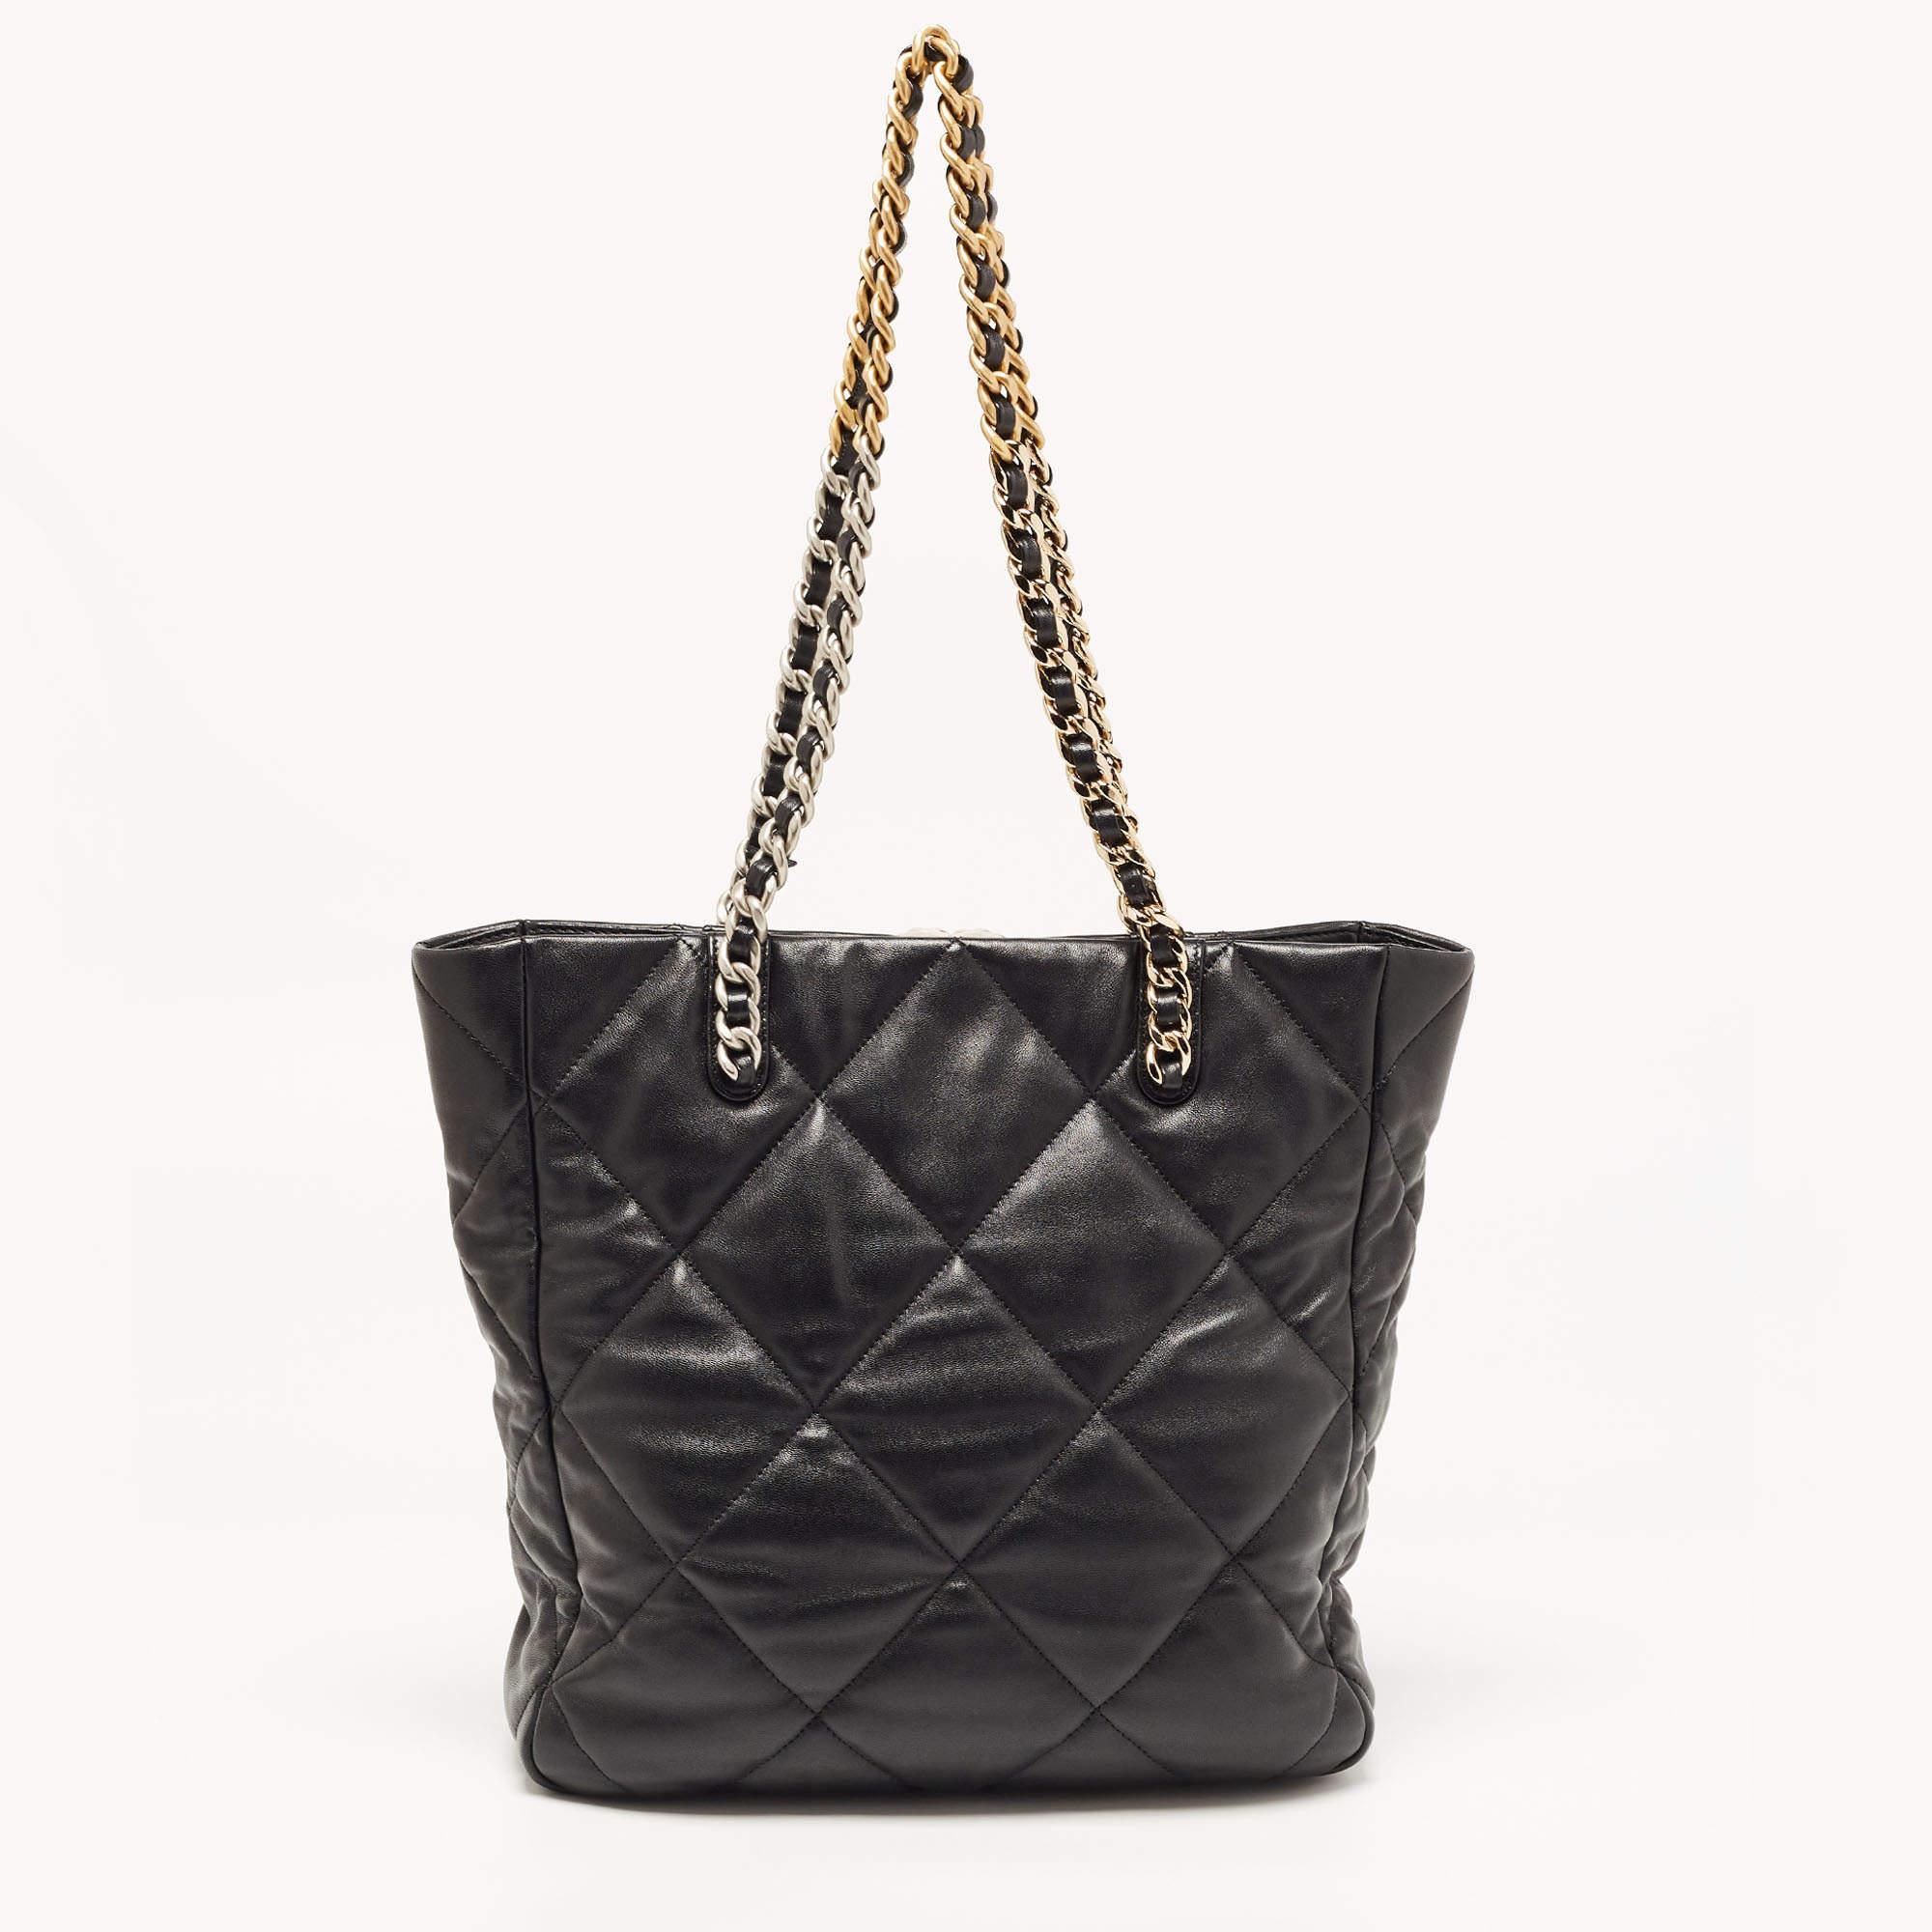 Chanel Black Quilted Leather 19 Shopper Tote 7